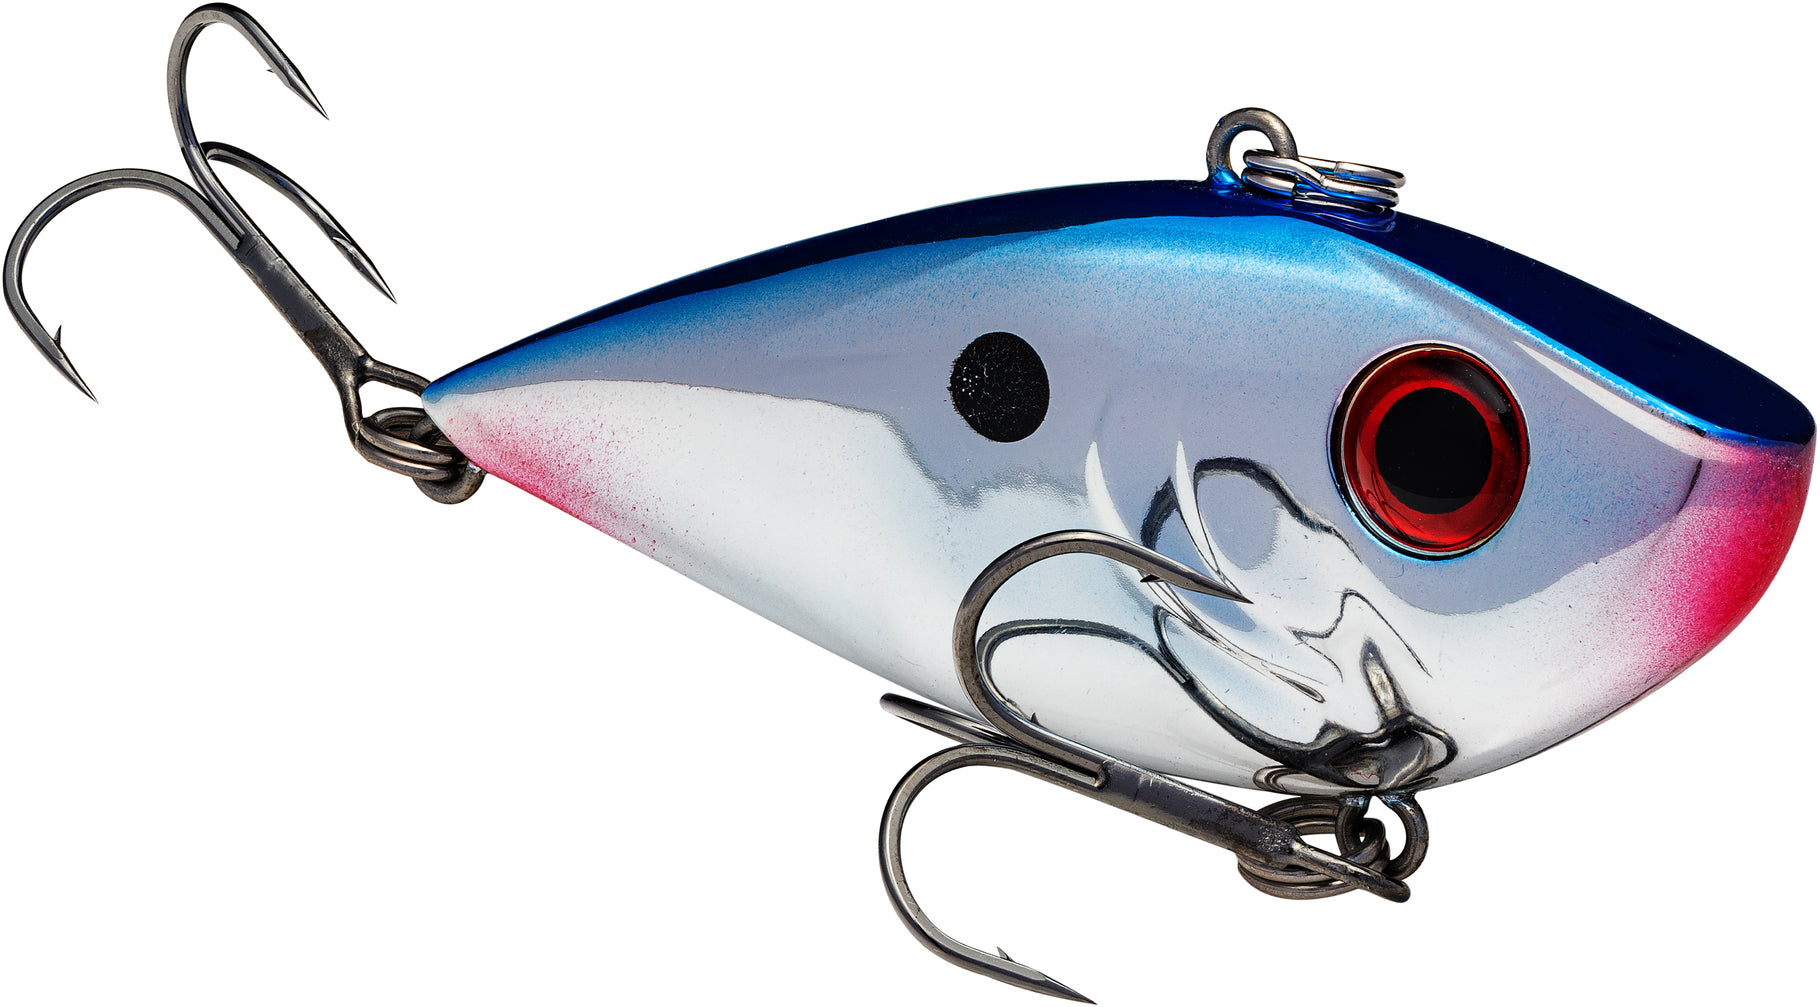 Strike King Red Eyed Shad Tungsten 2 Tap Lipless Crankbait - 3 Inch —  Discount Tackle